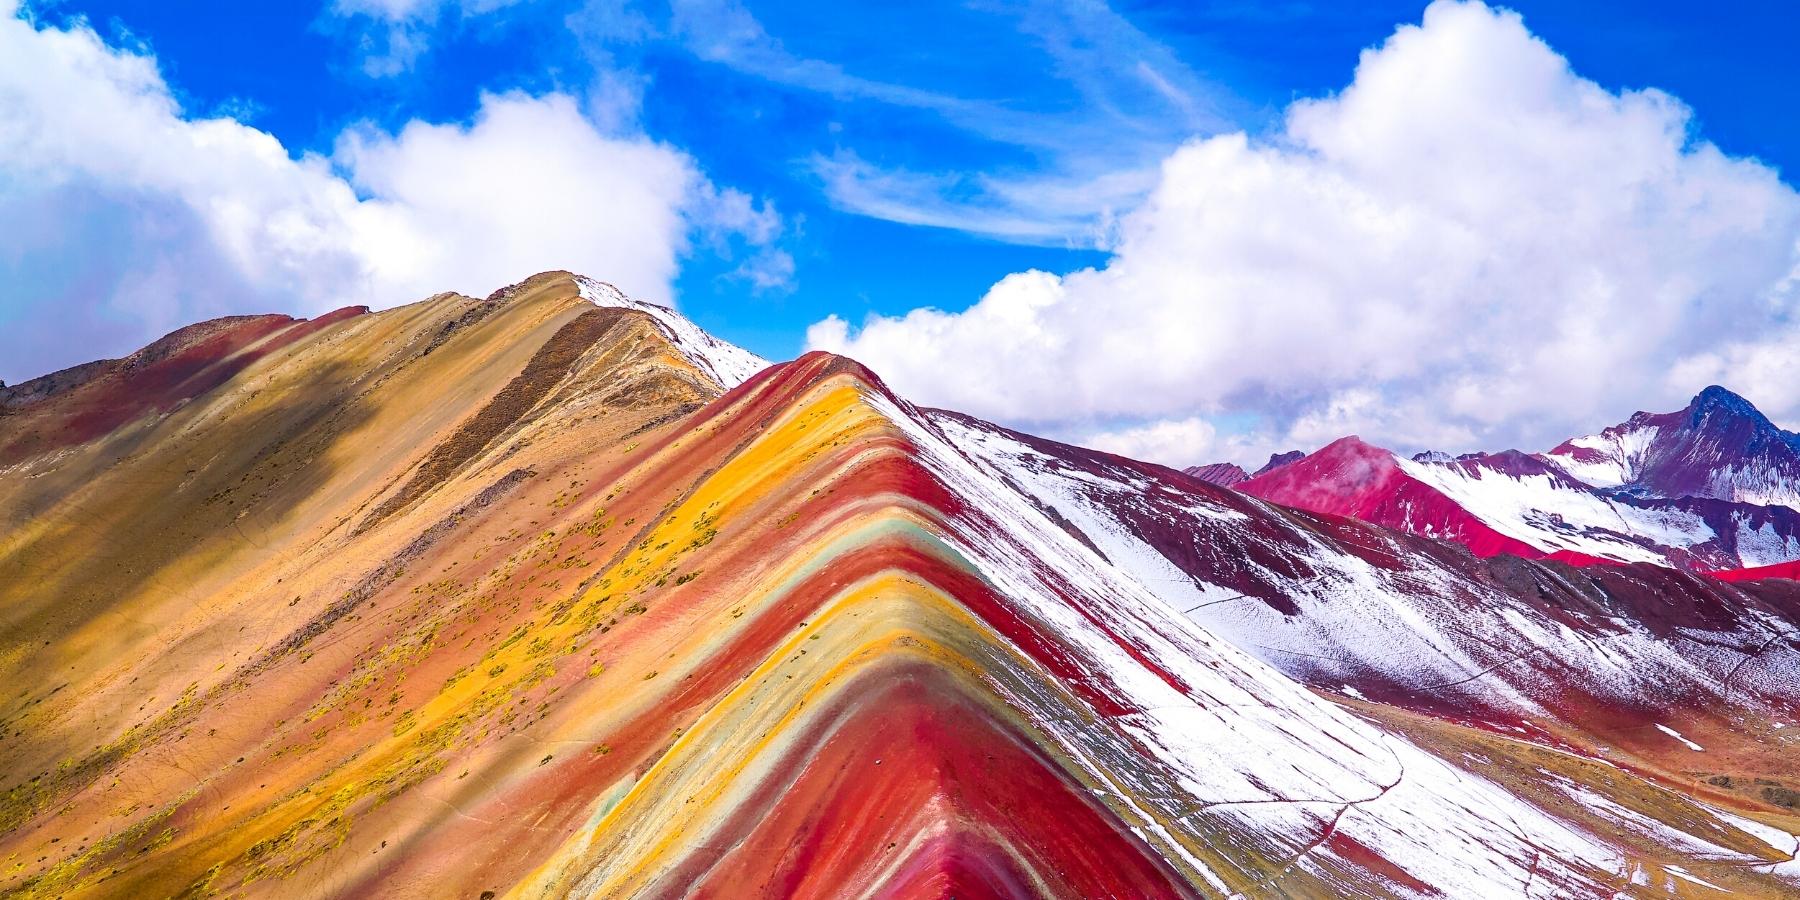 Trek to Vinicunca Rainbow Mountain 1 Day | Inca Trail Expeditions